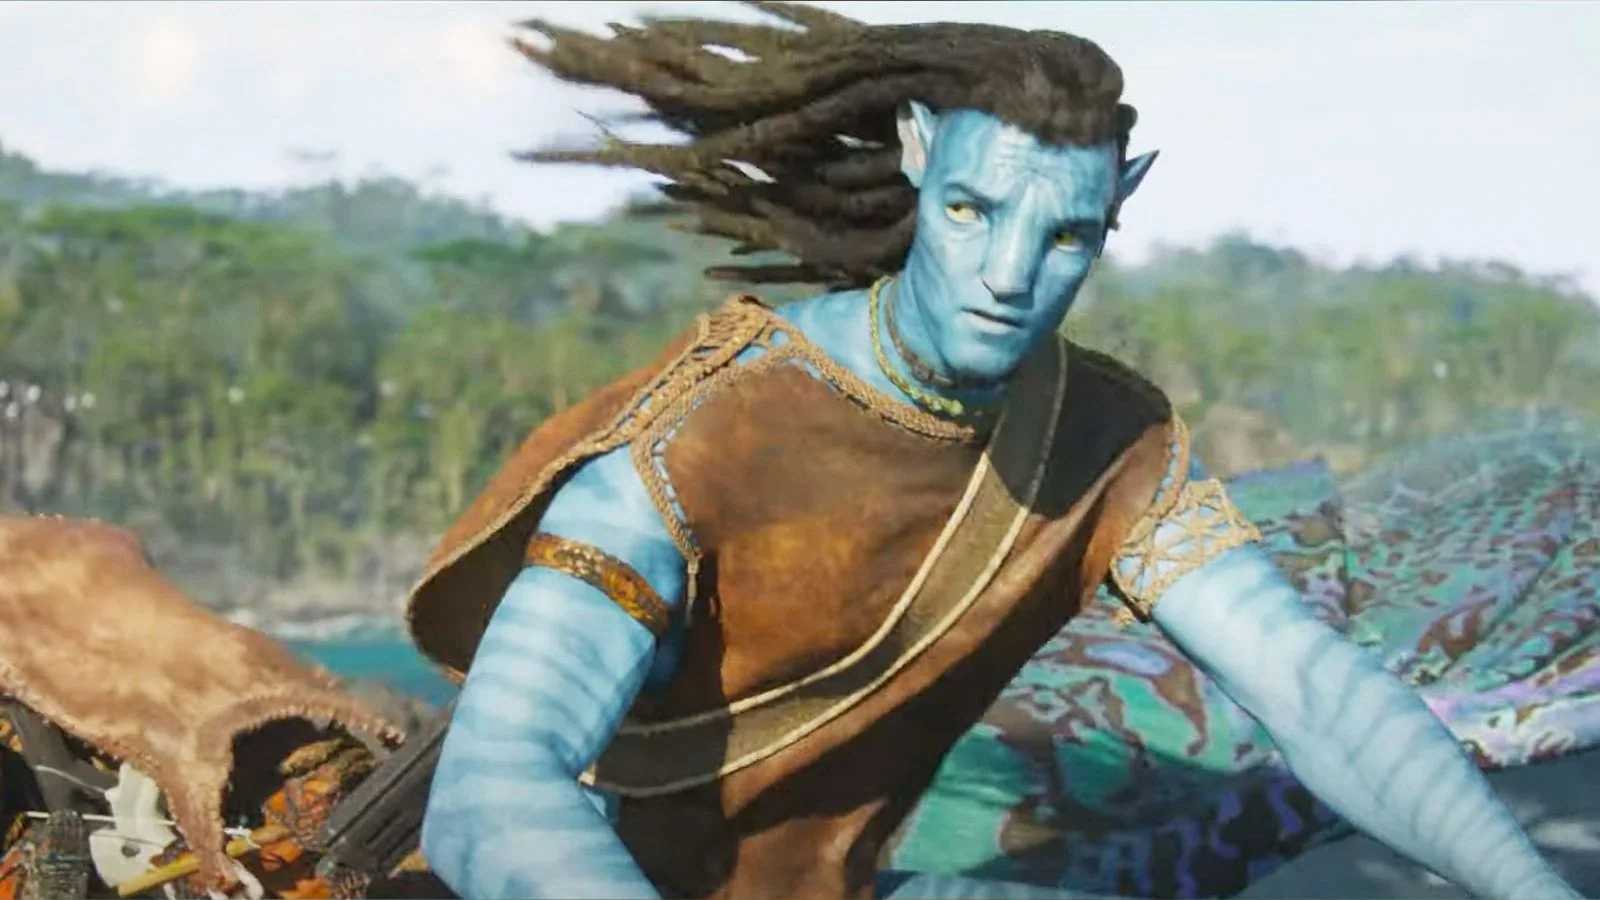 Avatar 2 uses new motion capture tech created by James Cameron for its underwater scenes